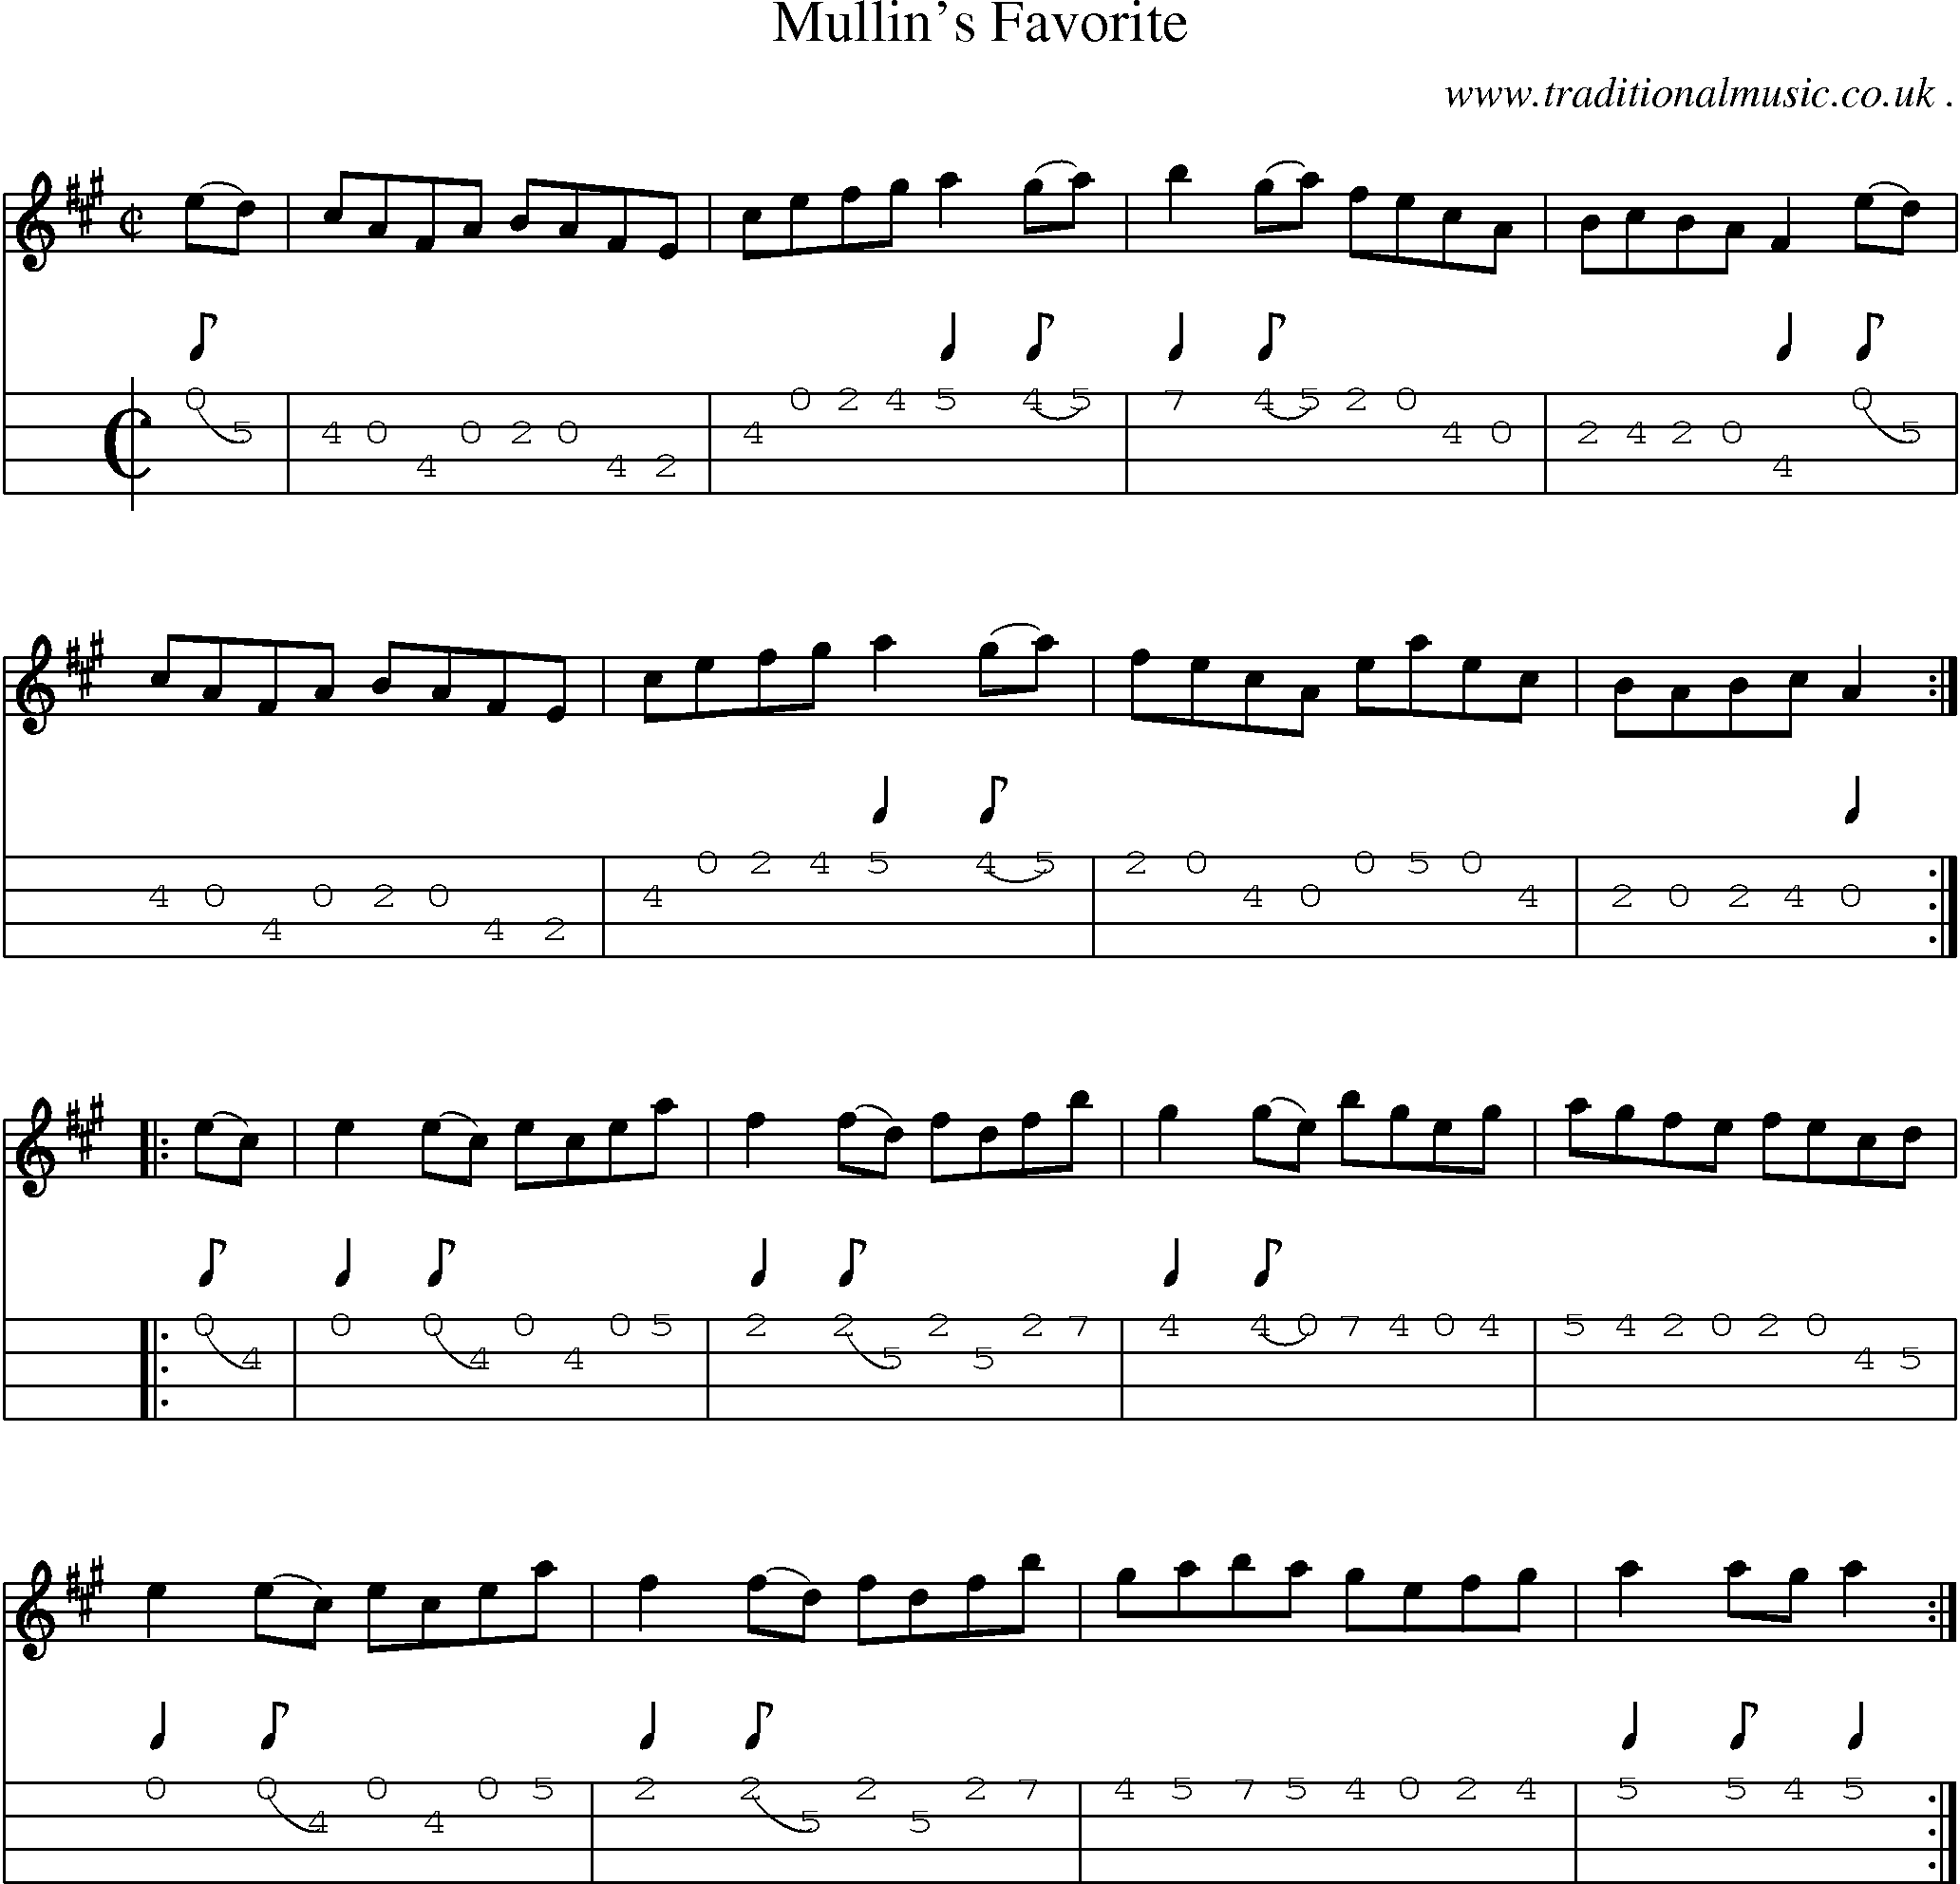 Sheet-Music and Mandolin Tabs for Mullins Favorite